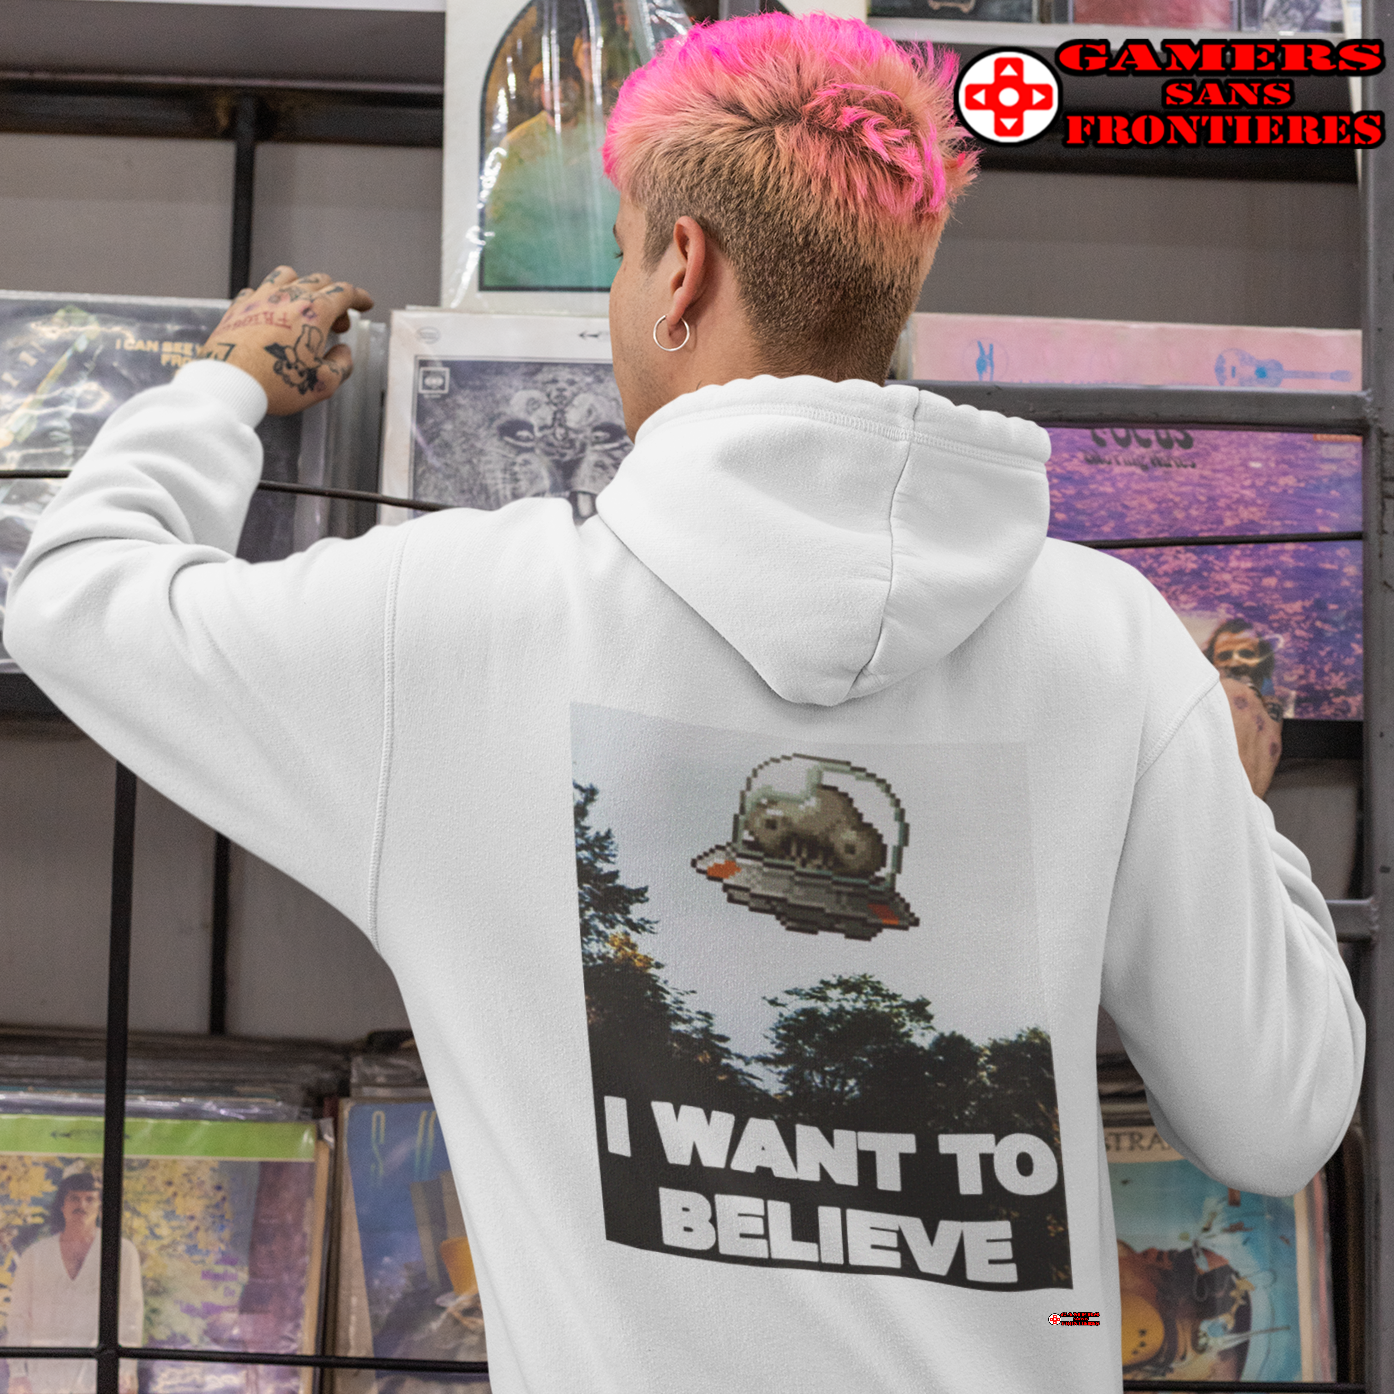 Unisex Hoodie - I Want to Believe